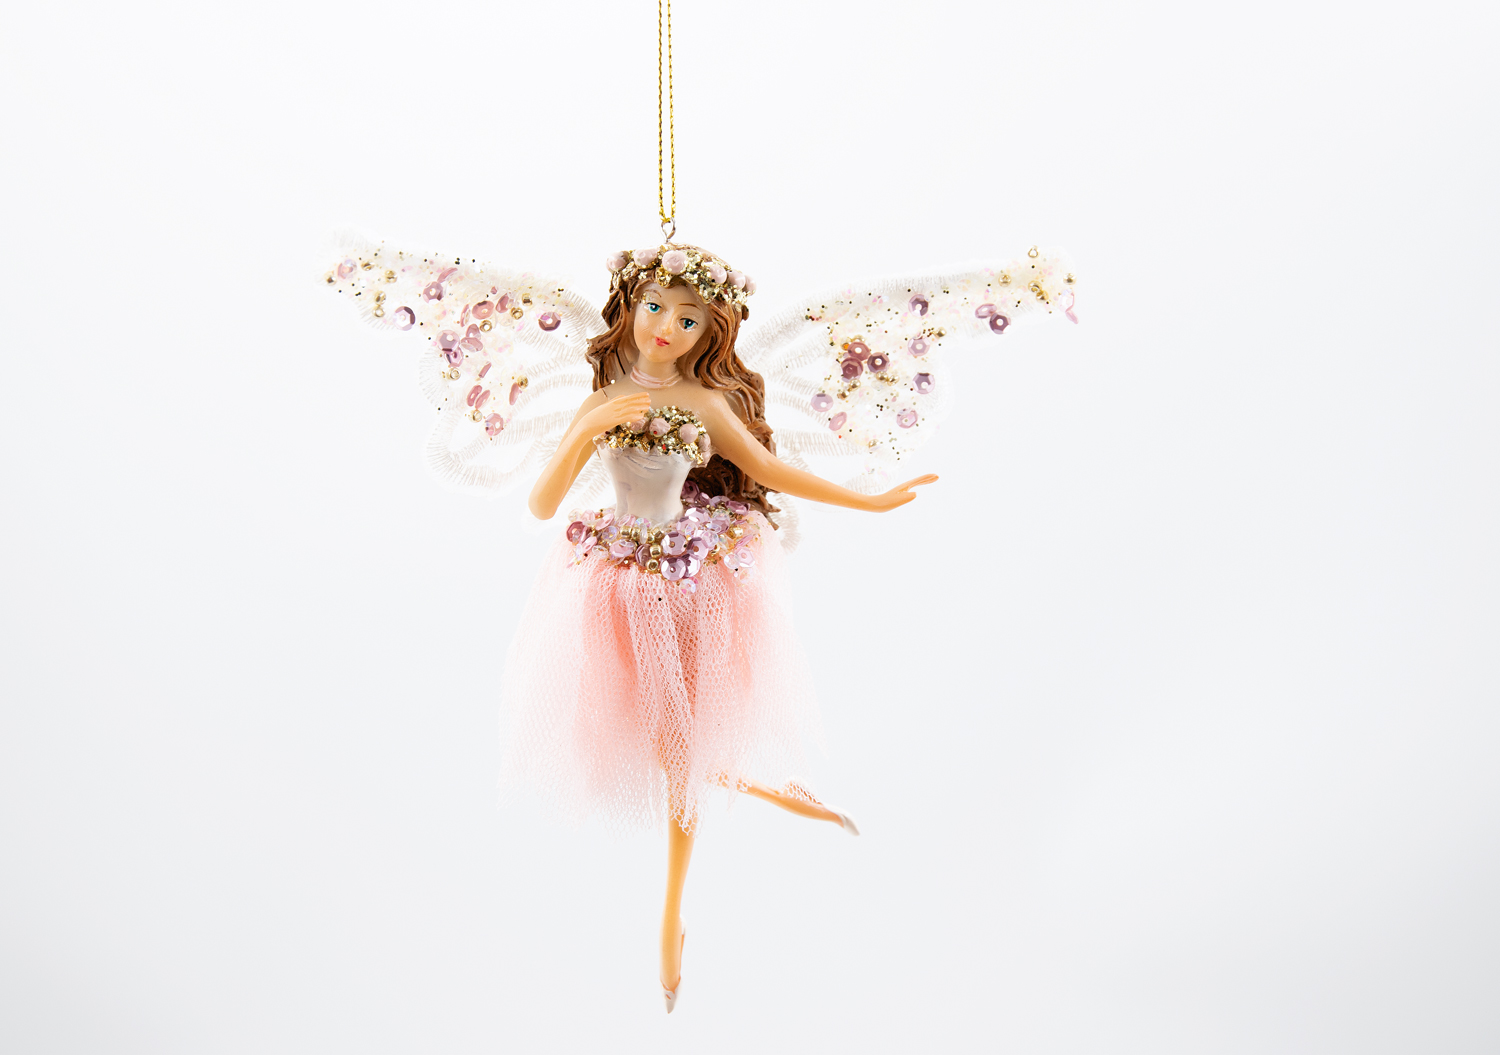 Good Will Tulle/Lace Wing Ballerina Christbaumschmuck